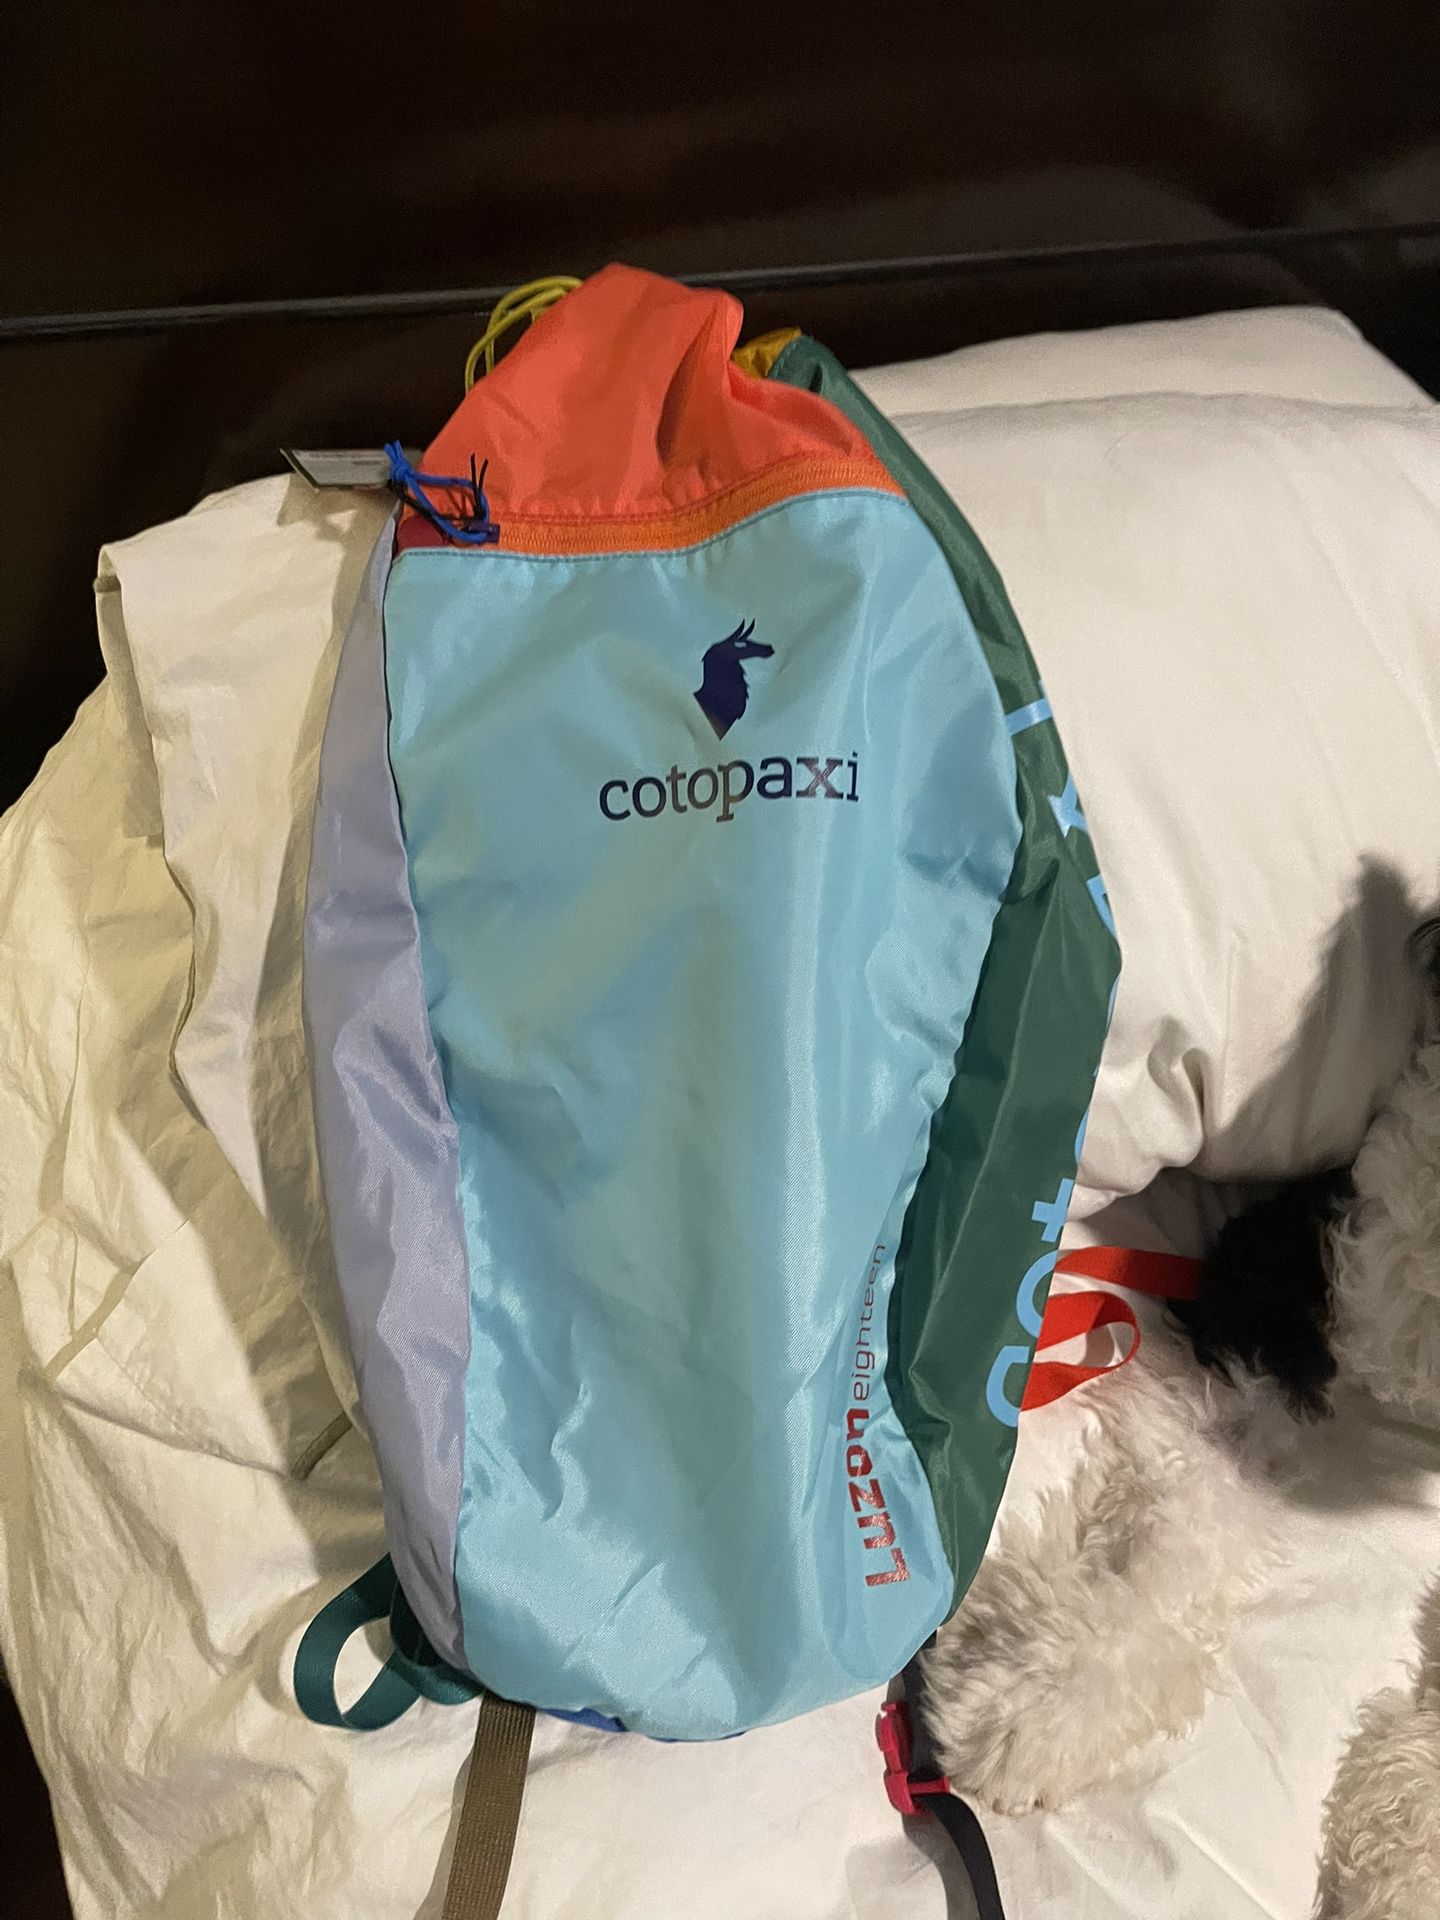 Cotopaxi Backpack  $30